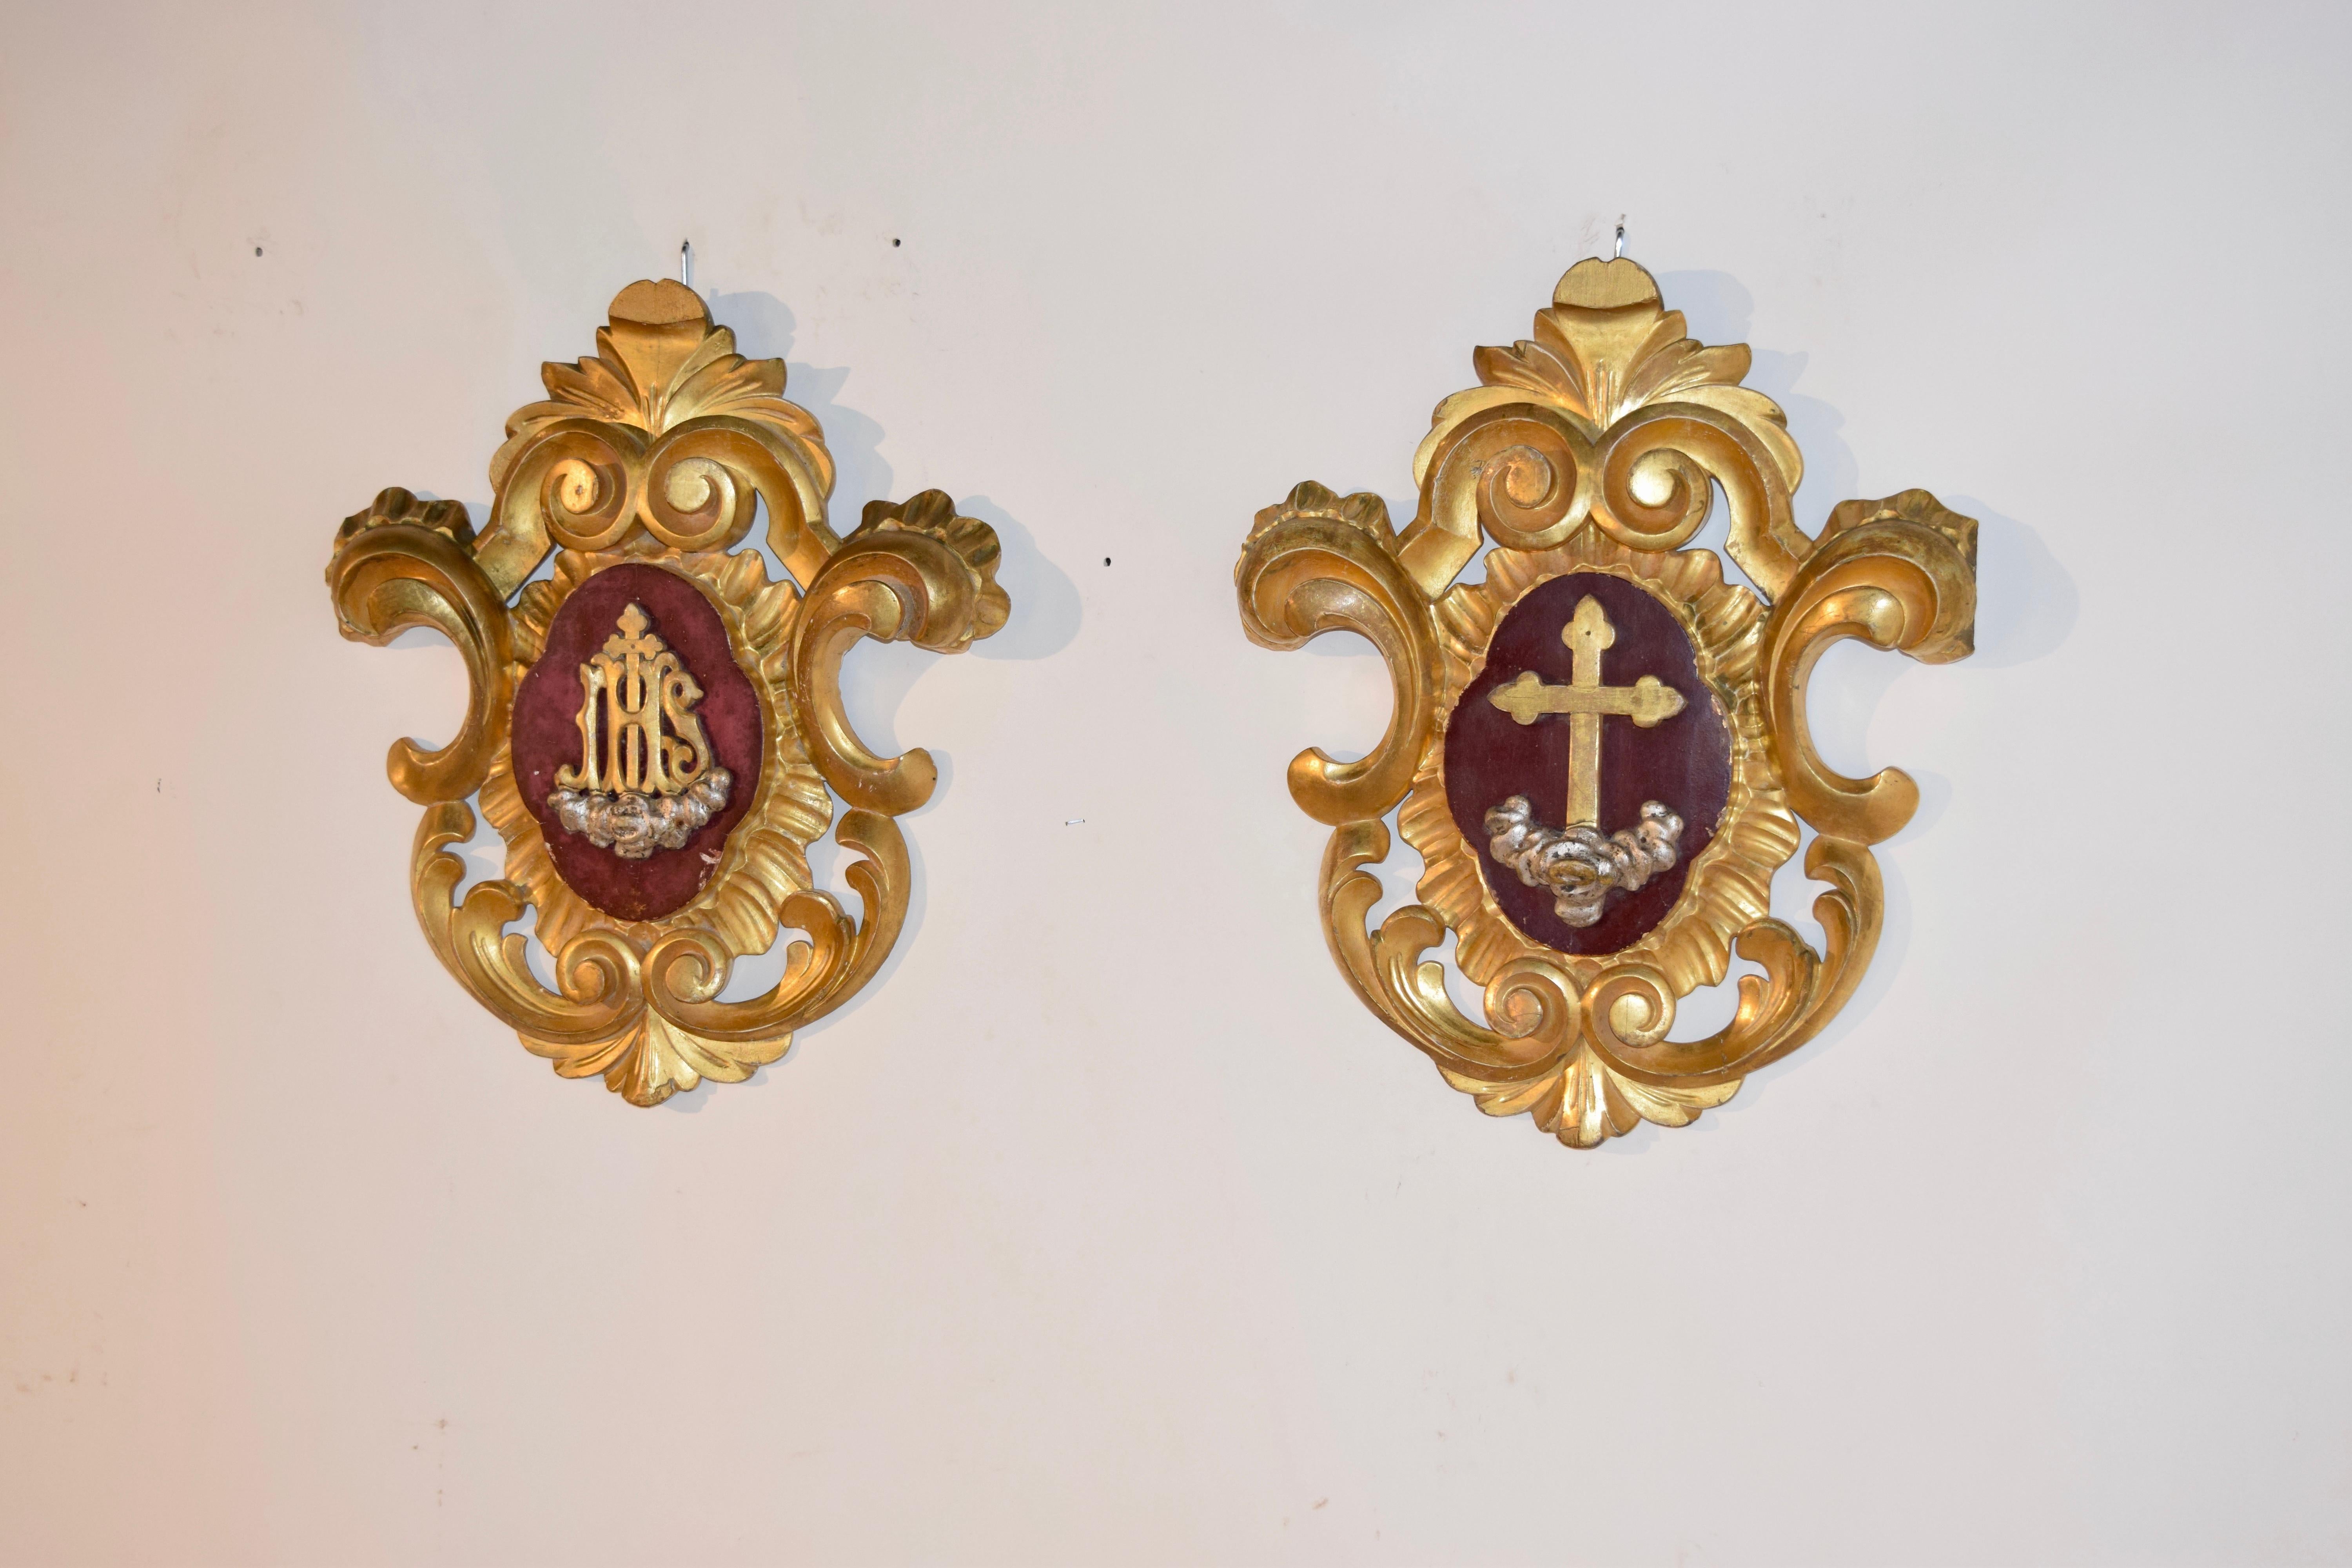 Pair of 19th century ecclesiastical plaques from France. They are hand carved from wood and gilded with central designs of a cross on one and IHS, the symbol of the Lord, on the other.